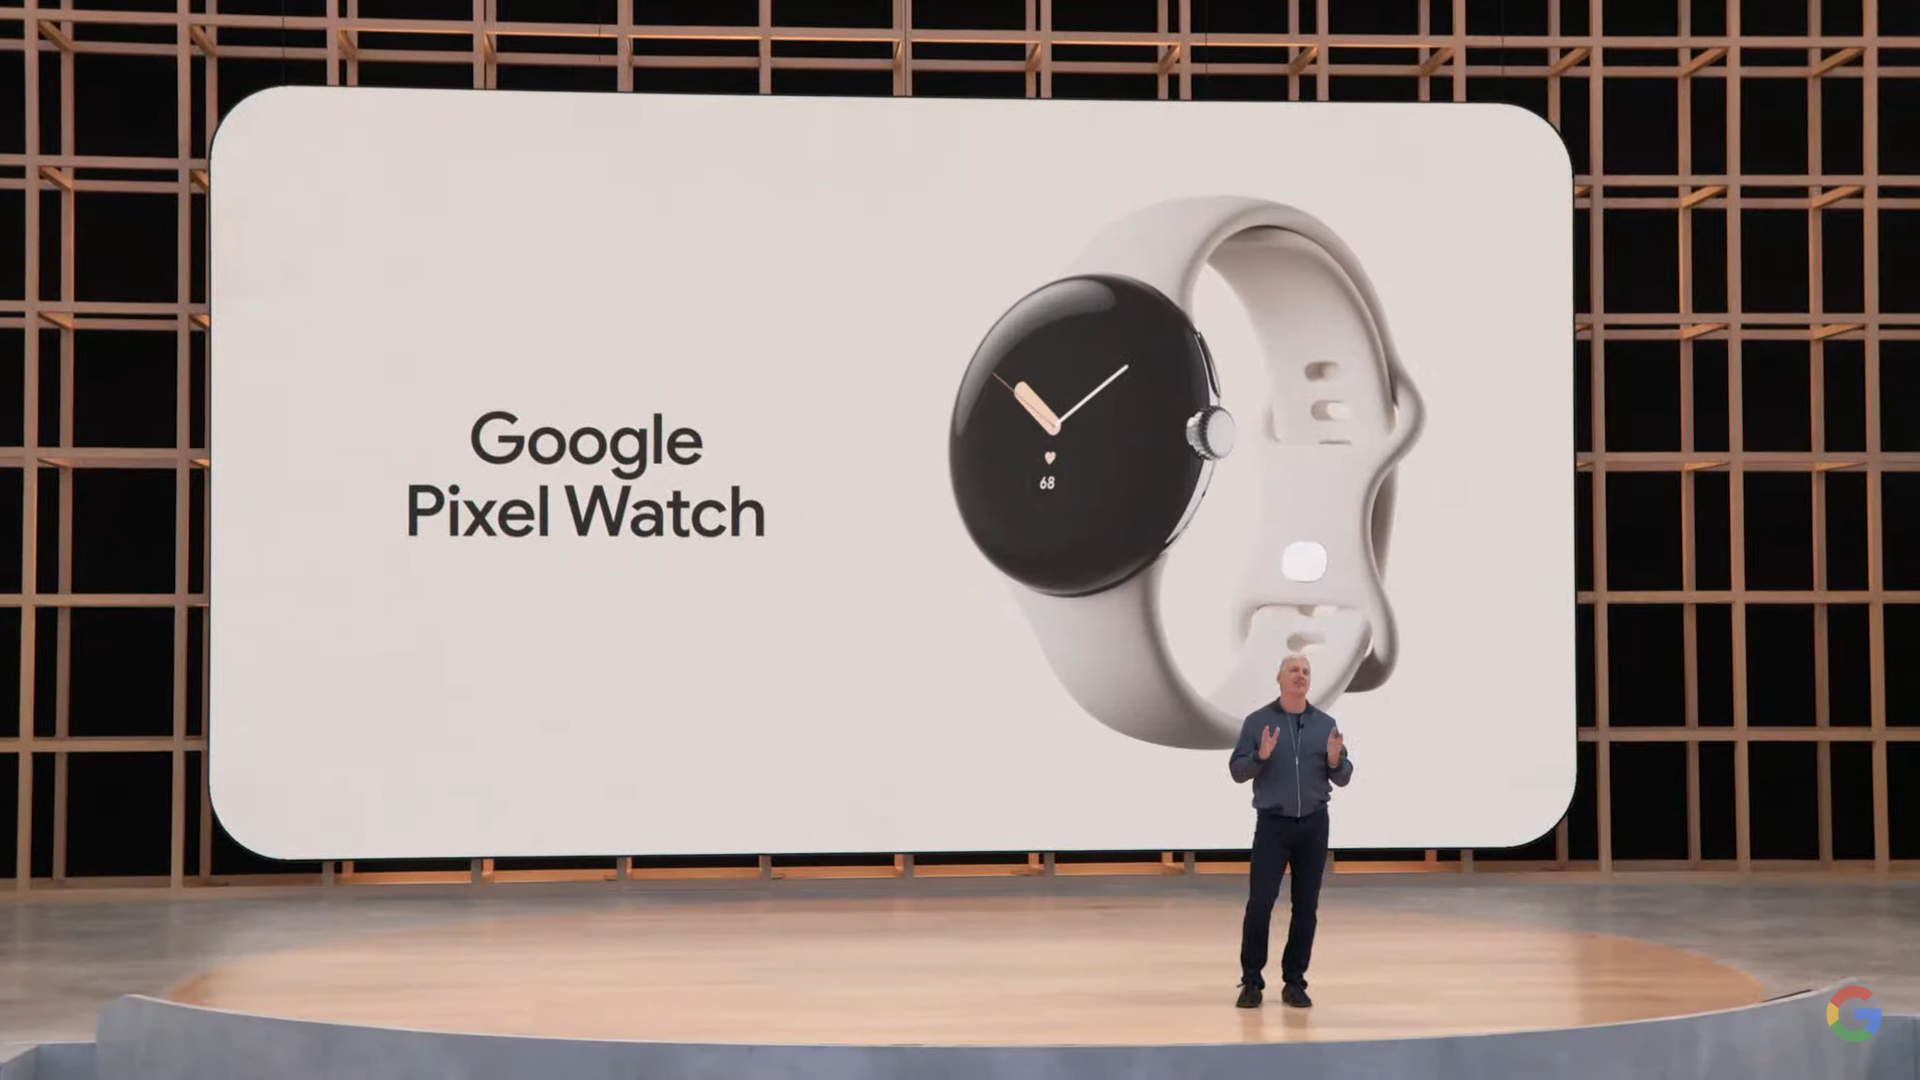 Google hardware chief Rick Osterloh standing on stage in front of a picture of the Pixel Watch.